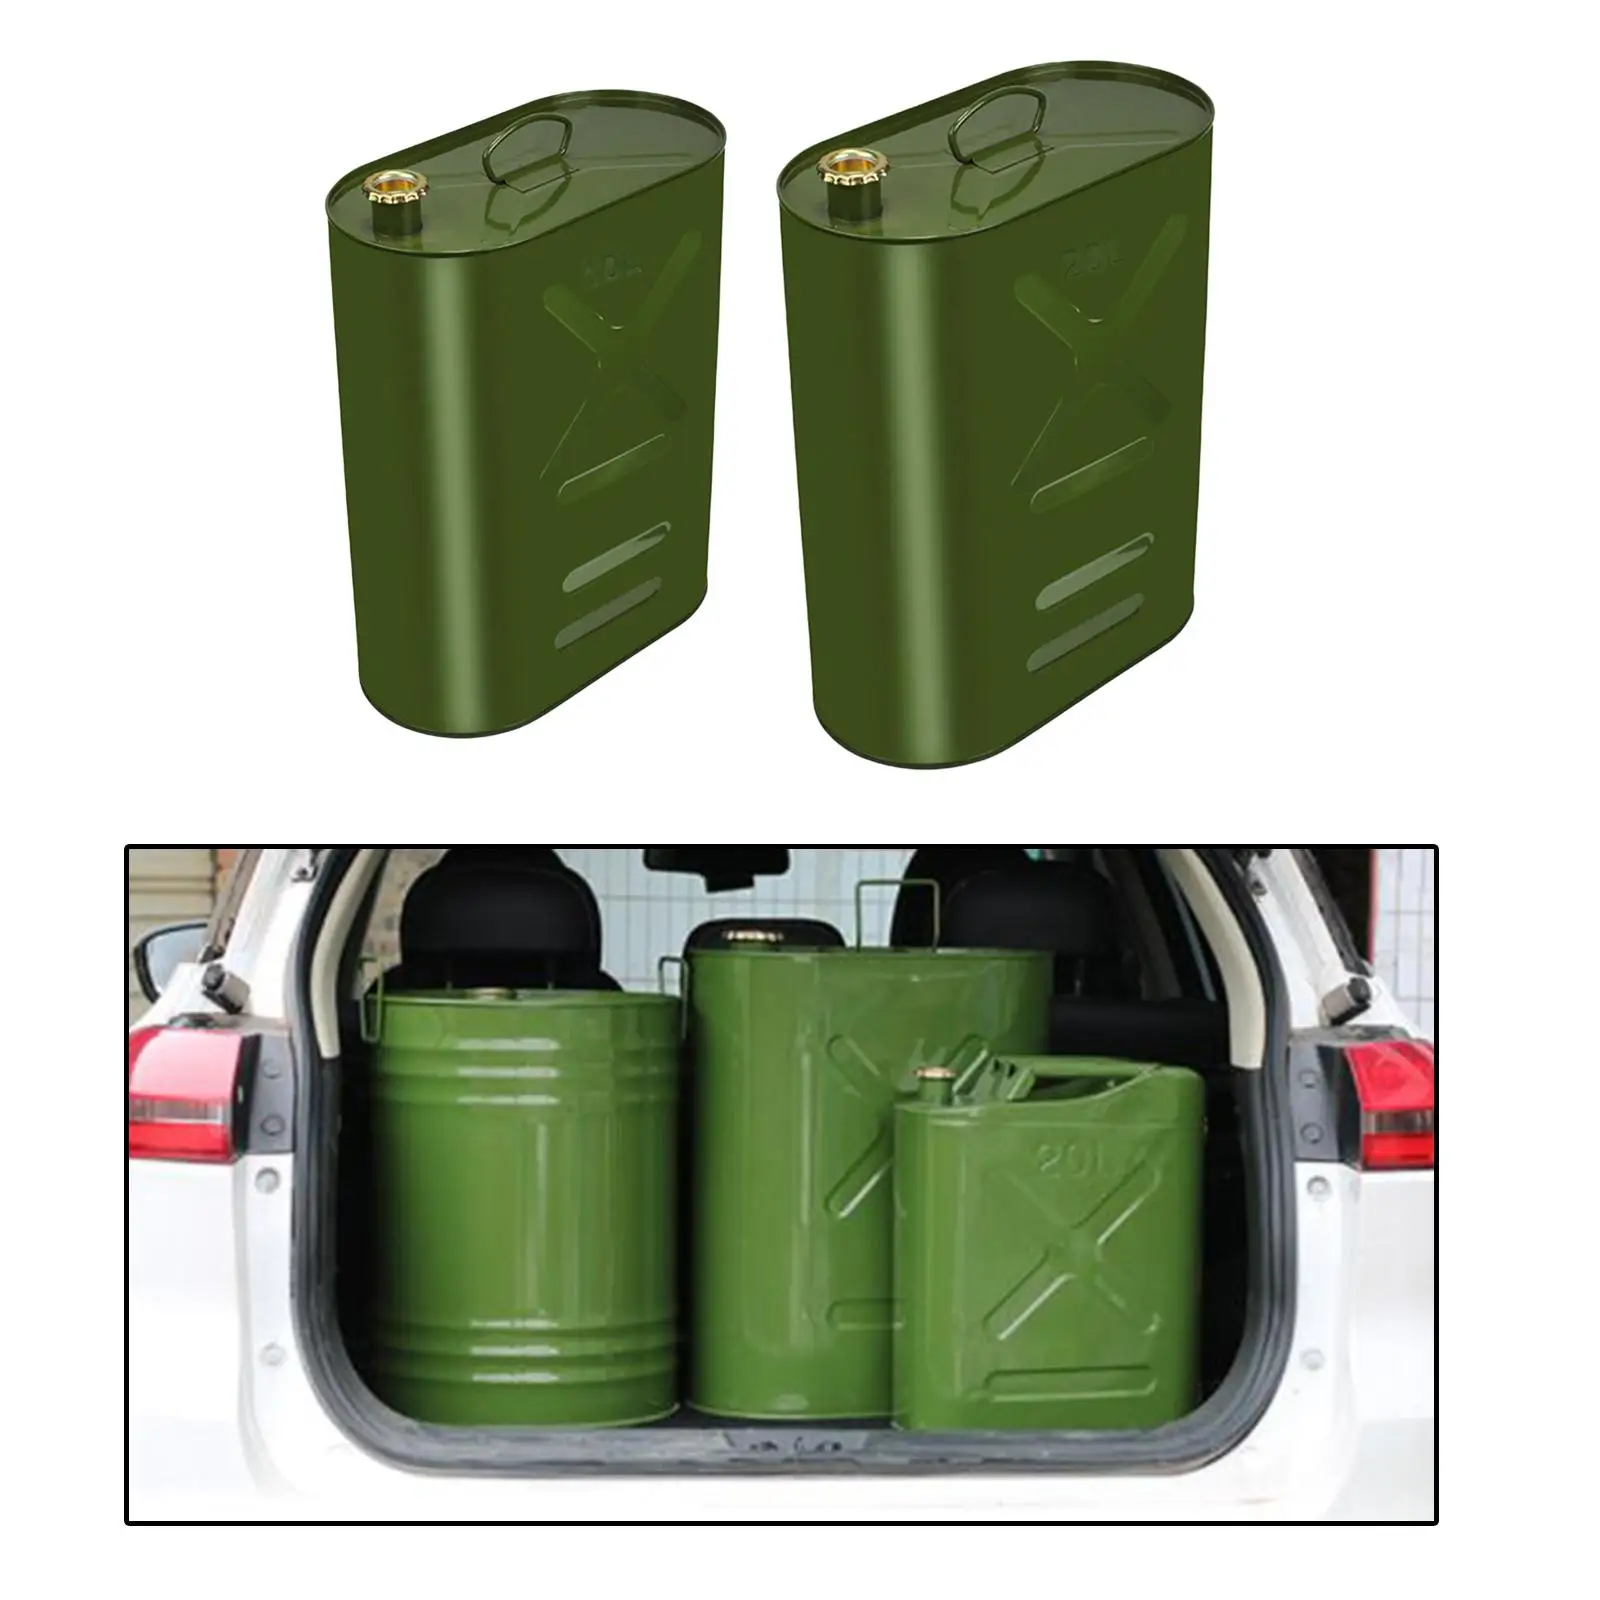 Durable Fuel Tank Fixed Nozzle Vehicle Equipment Leakproof Motorcycle Parts Petrol Cans Container for SUV Household Travel Car